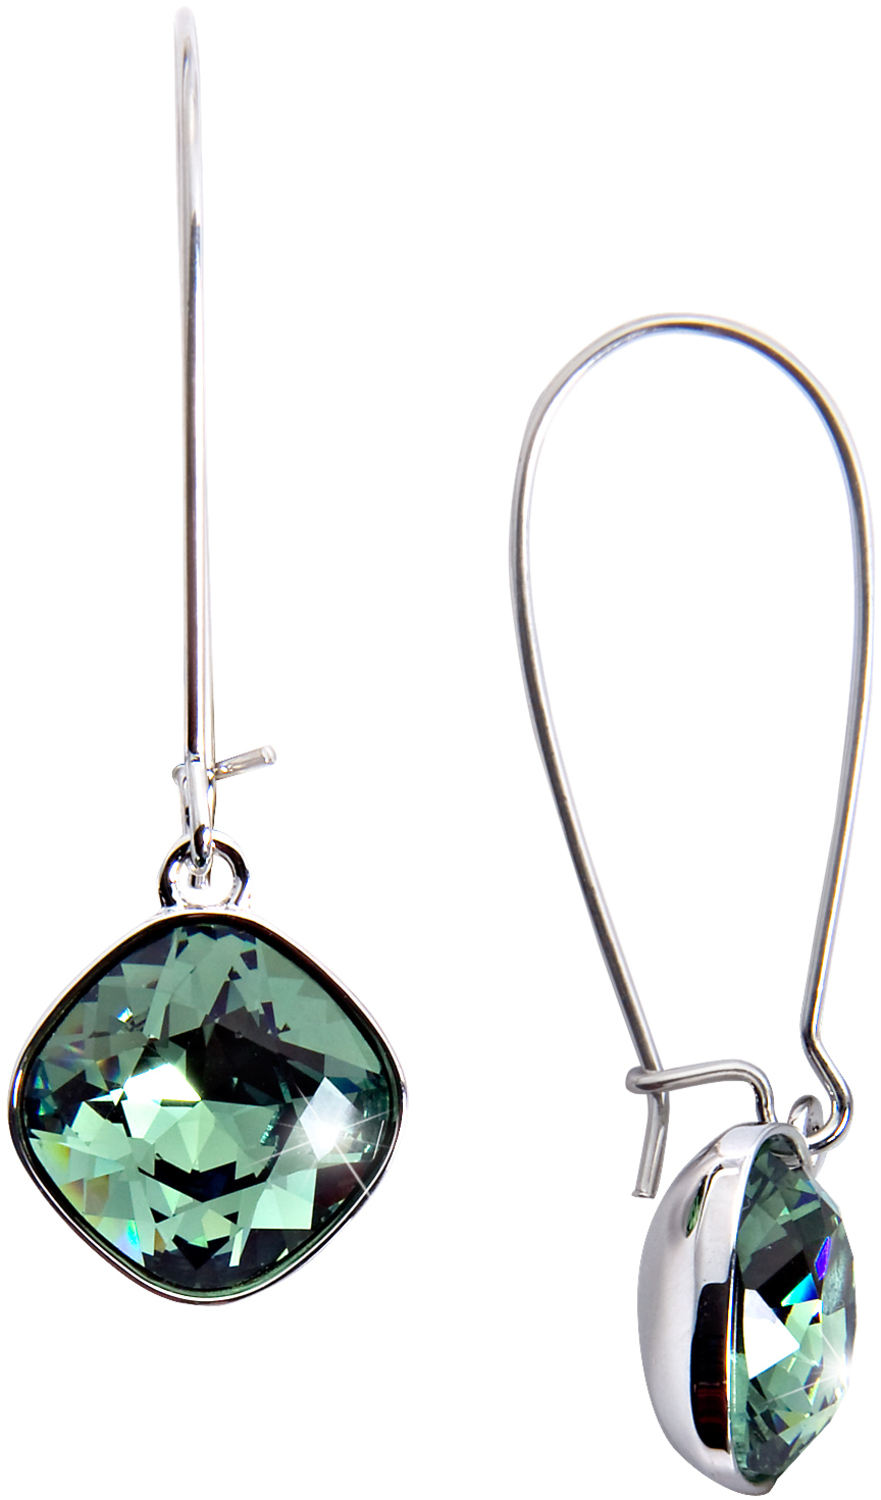 Isabel Erinite by H2Z Made with Swarovski Elements - Isabel Erinite - 1.875" Dangle Earring with 0.5" Crystal made from Swarovski Elements